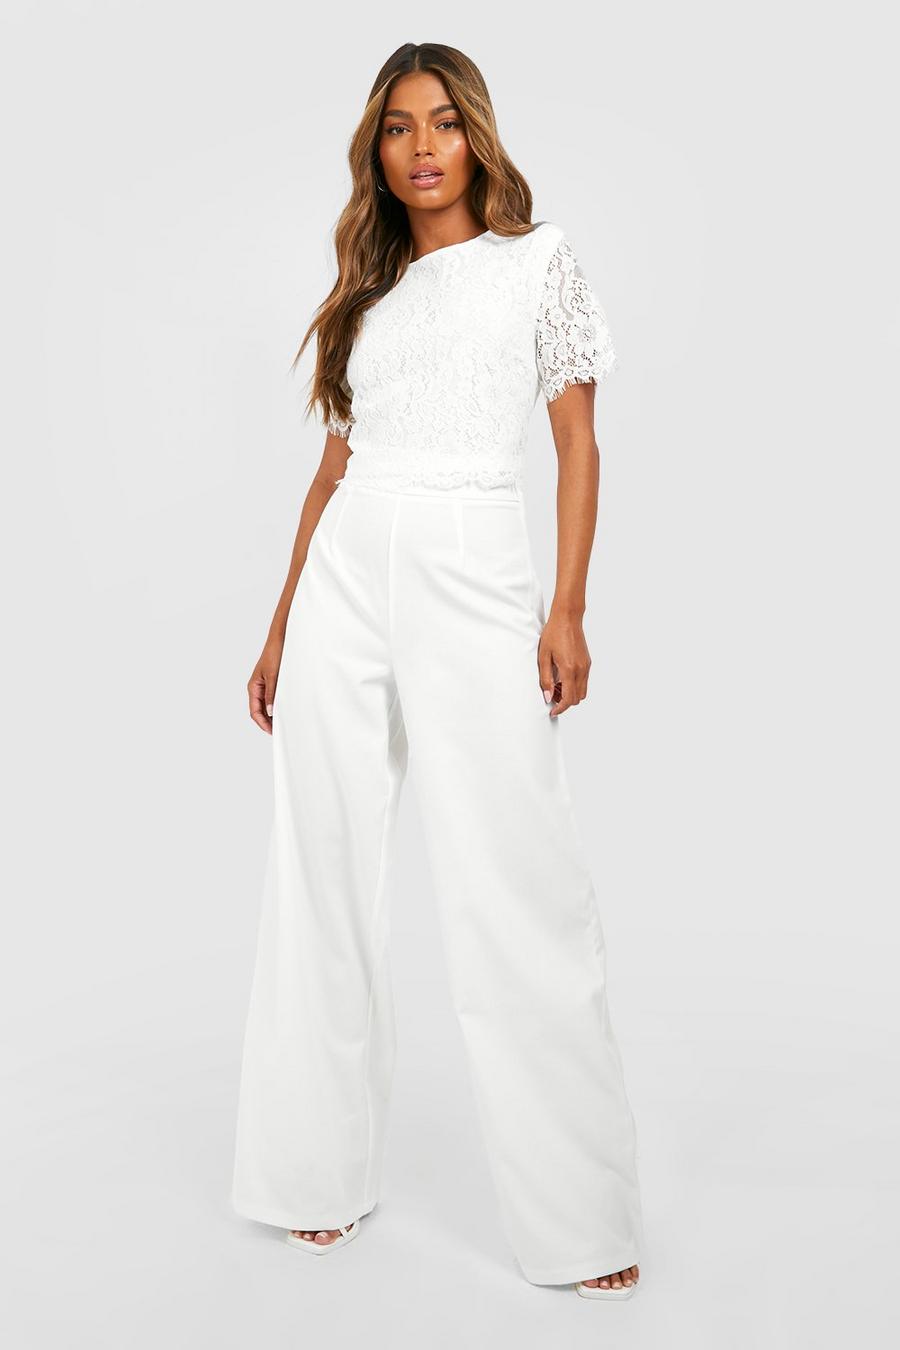 White Scalloped Hem Lace Top & Wide Leg Pants image number 1